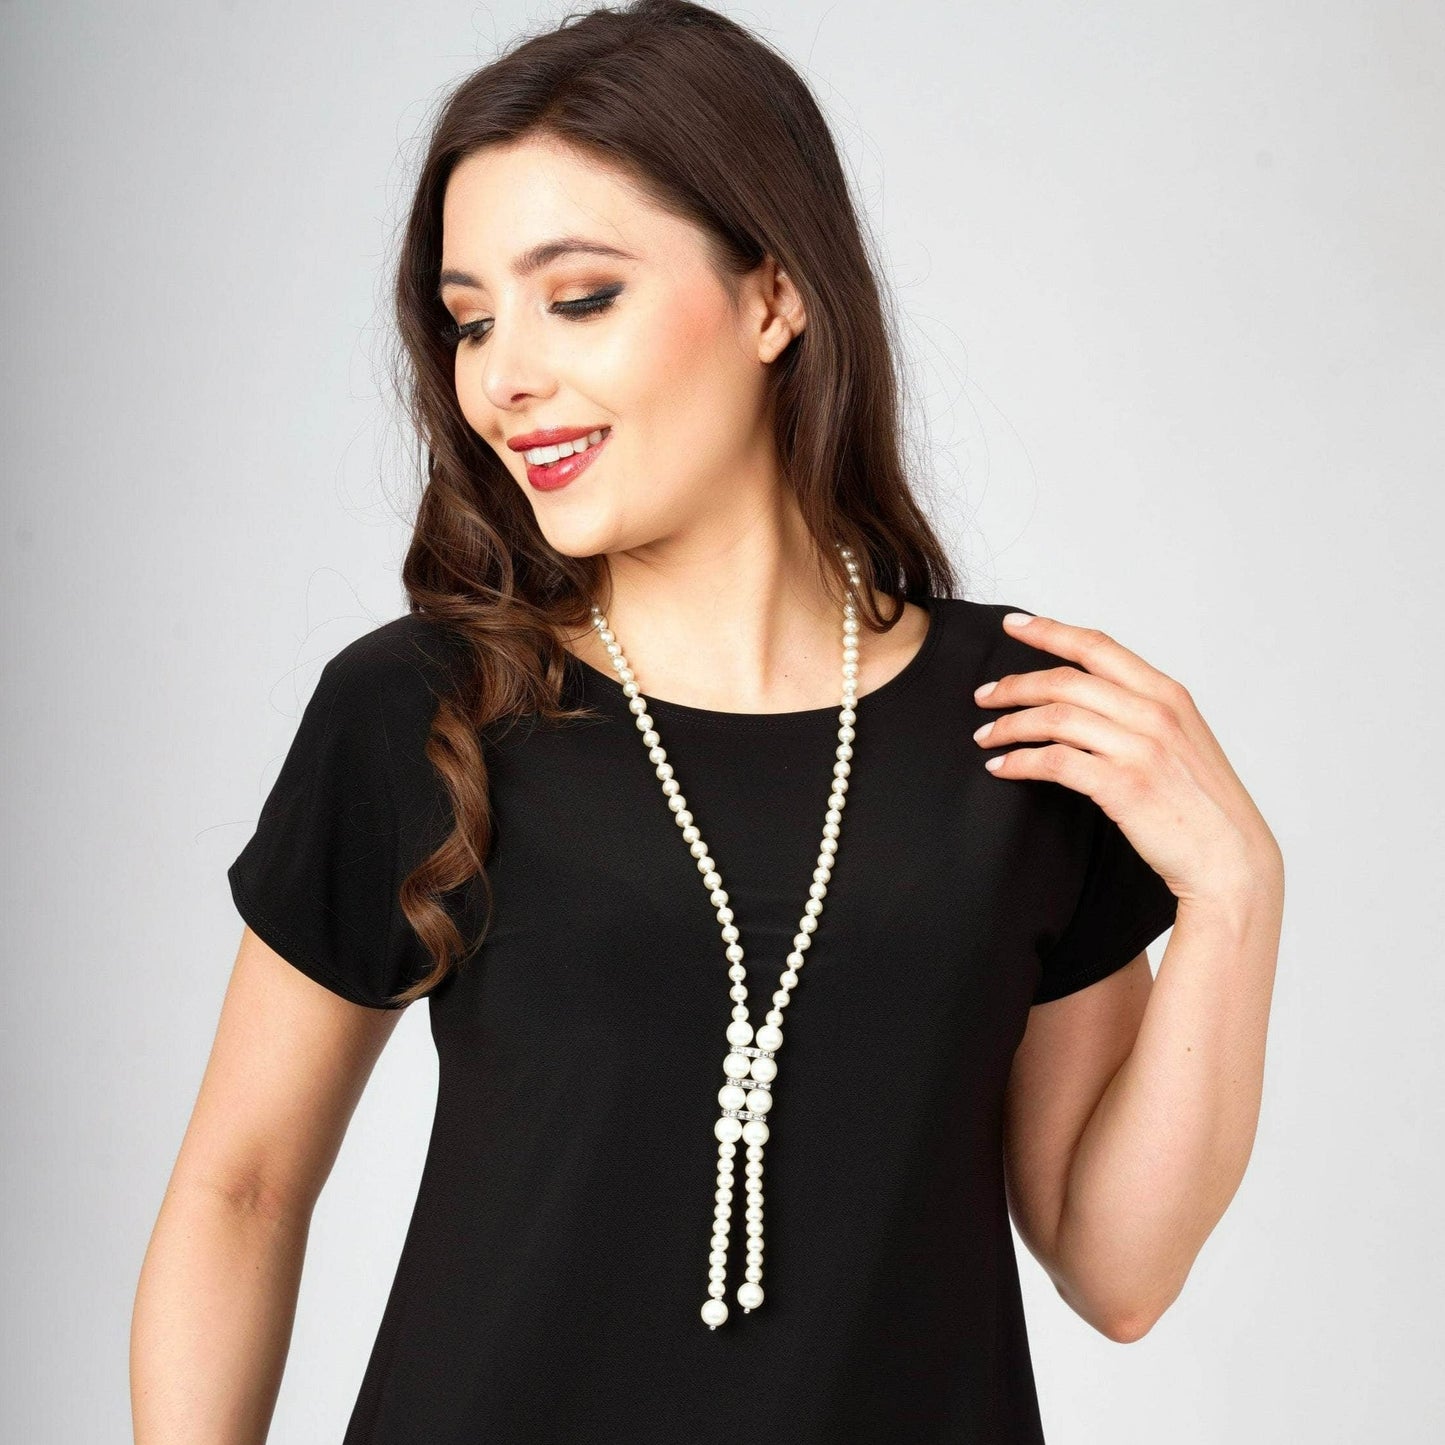 Saloos Black Top with Pearl Necklace